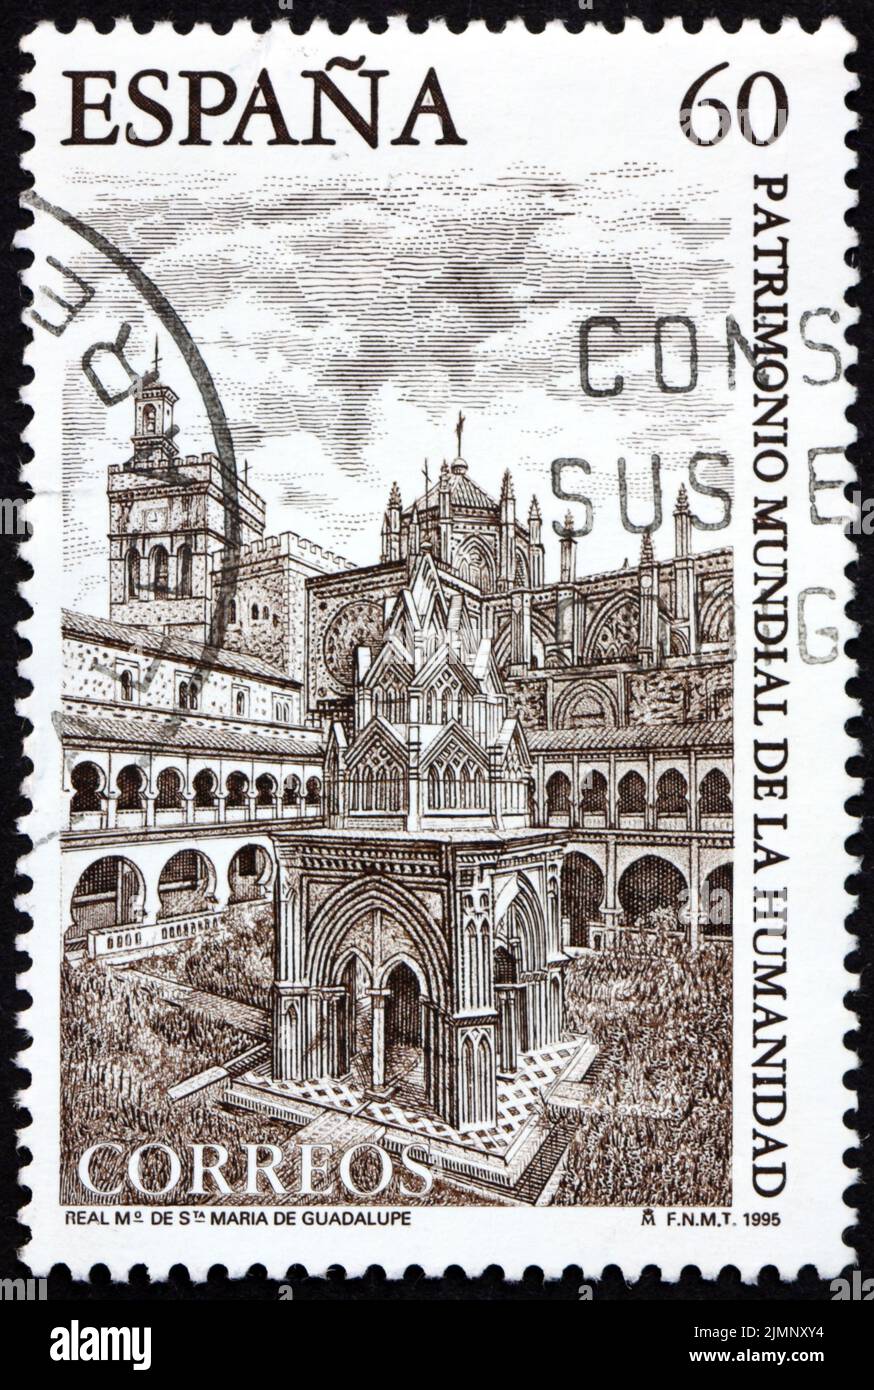 SPAIN - CIRCA 1995: a stamp printed in Spain shows Royal Monastery of Santa Maria de Guadalupe, World Heritage of Humanity, circa 1995 Stock Photo